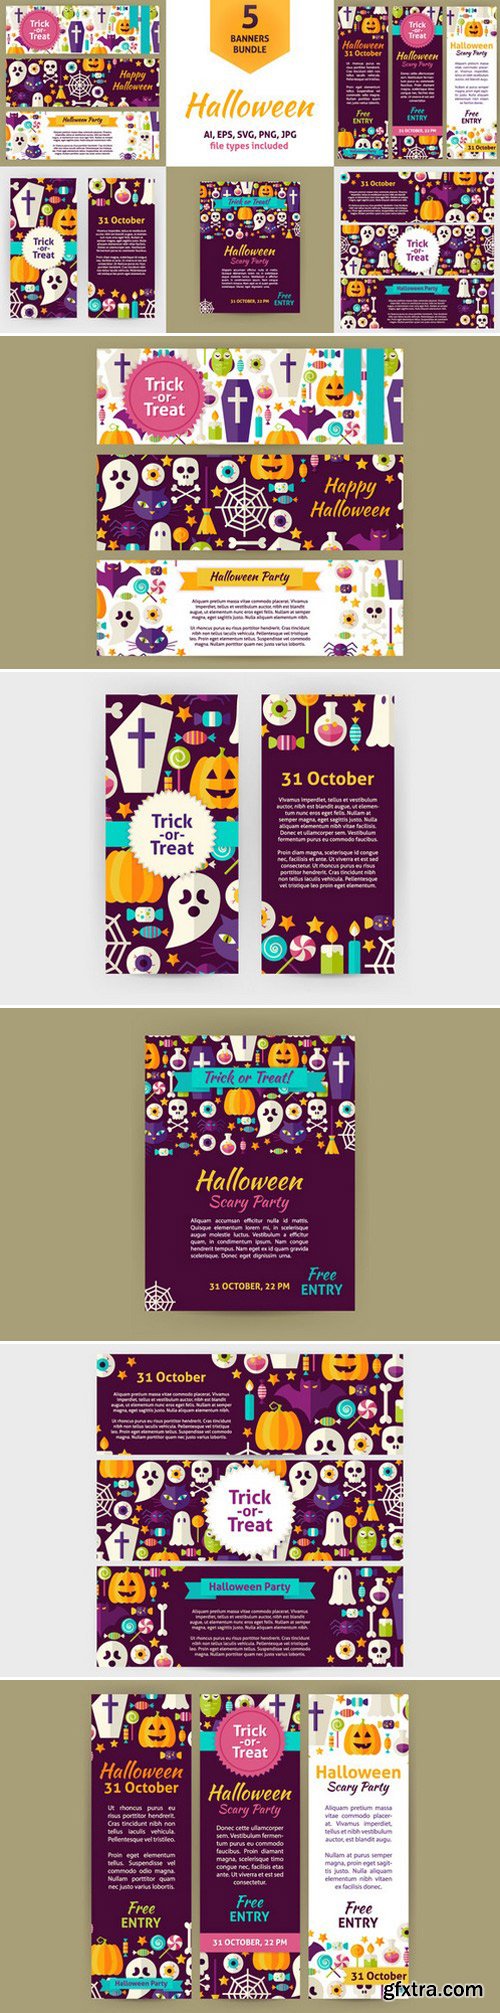 CM - Scary Halloween Vector Flat Banners 390254